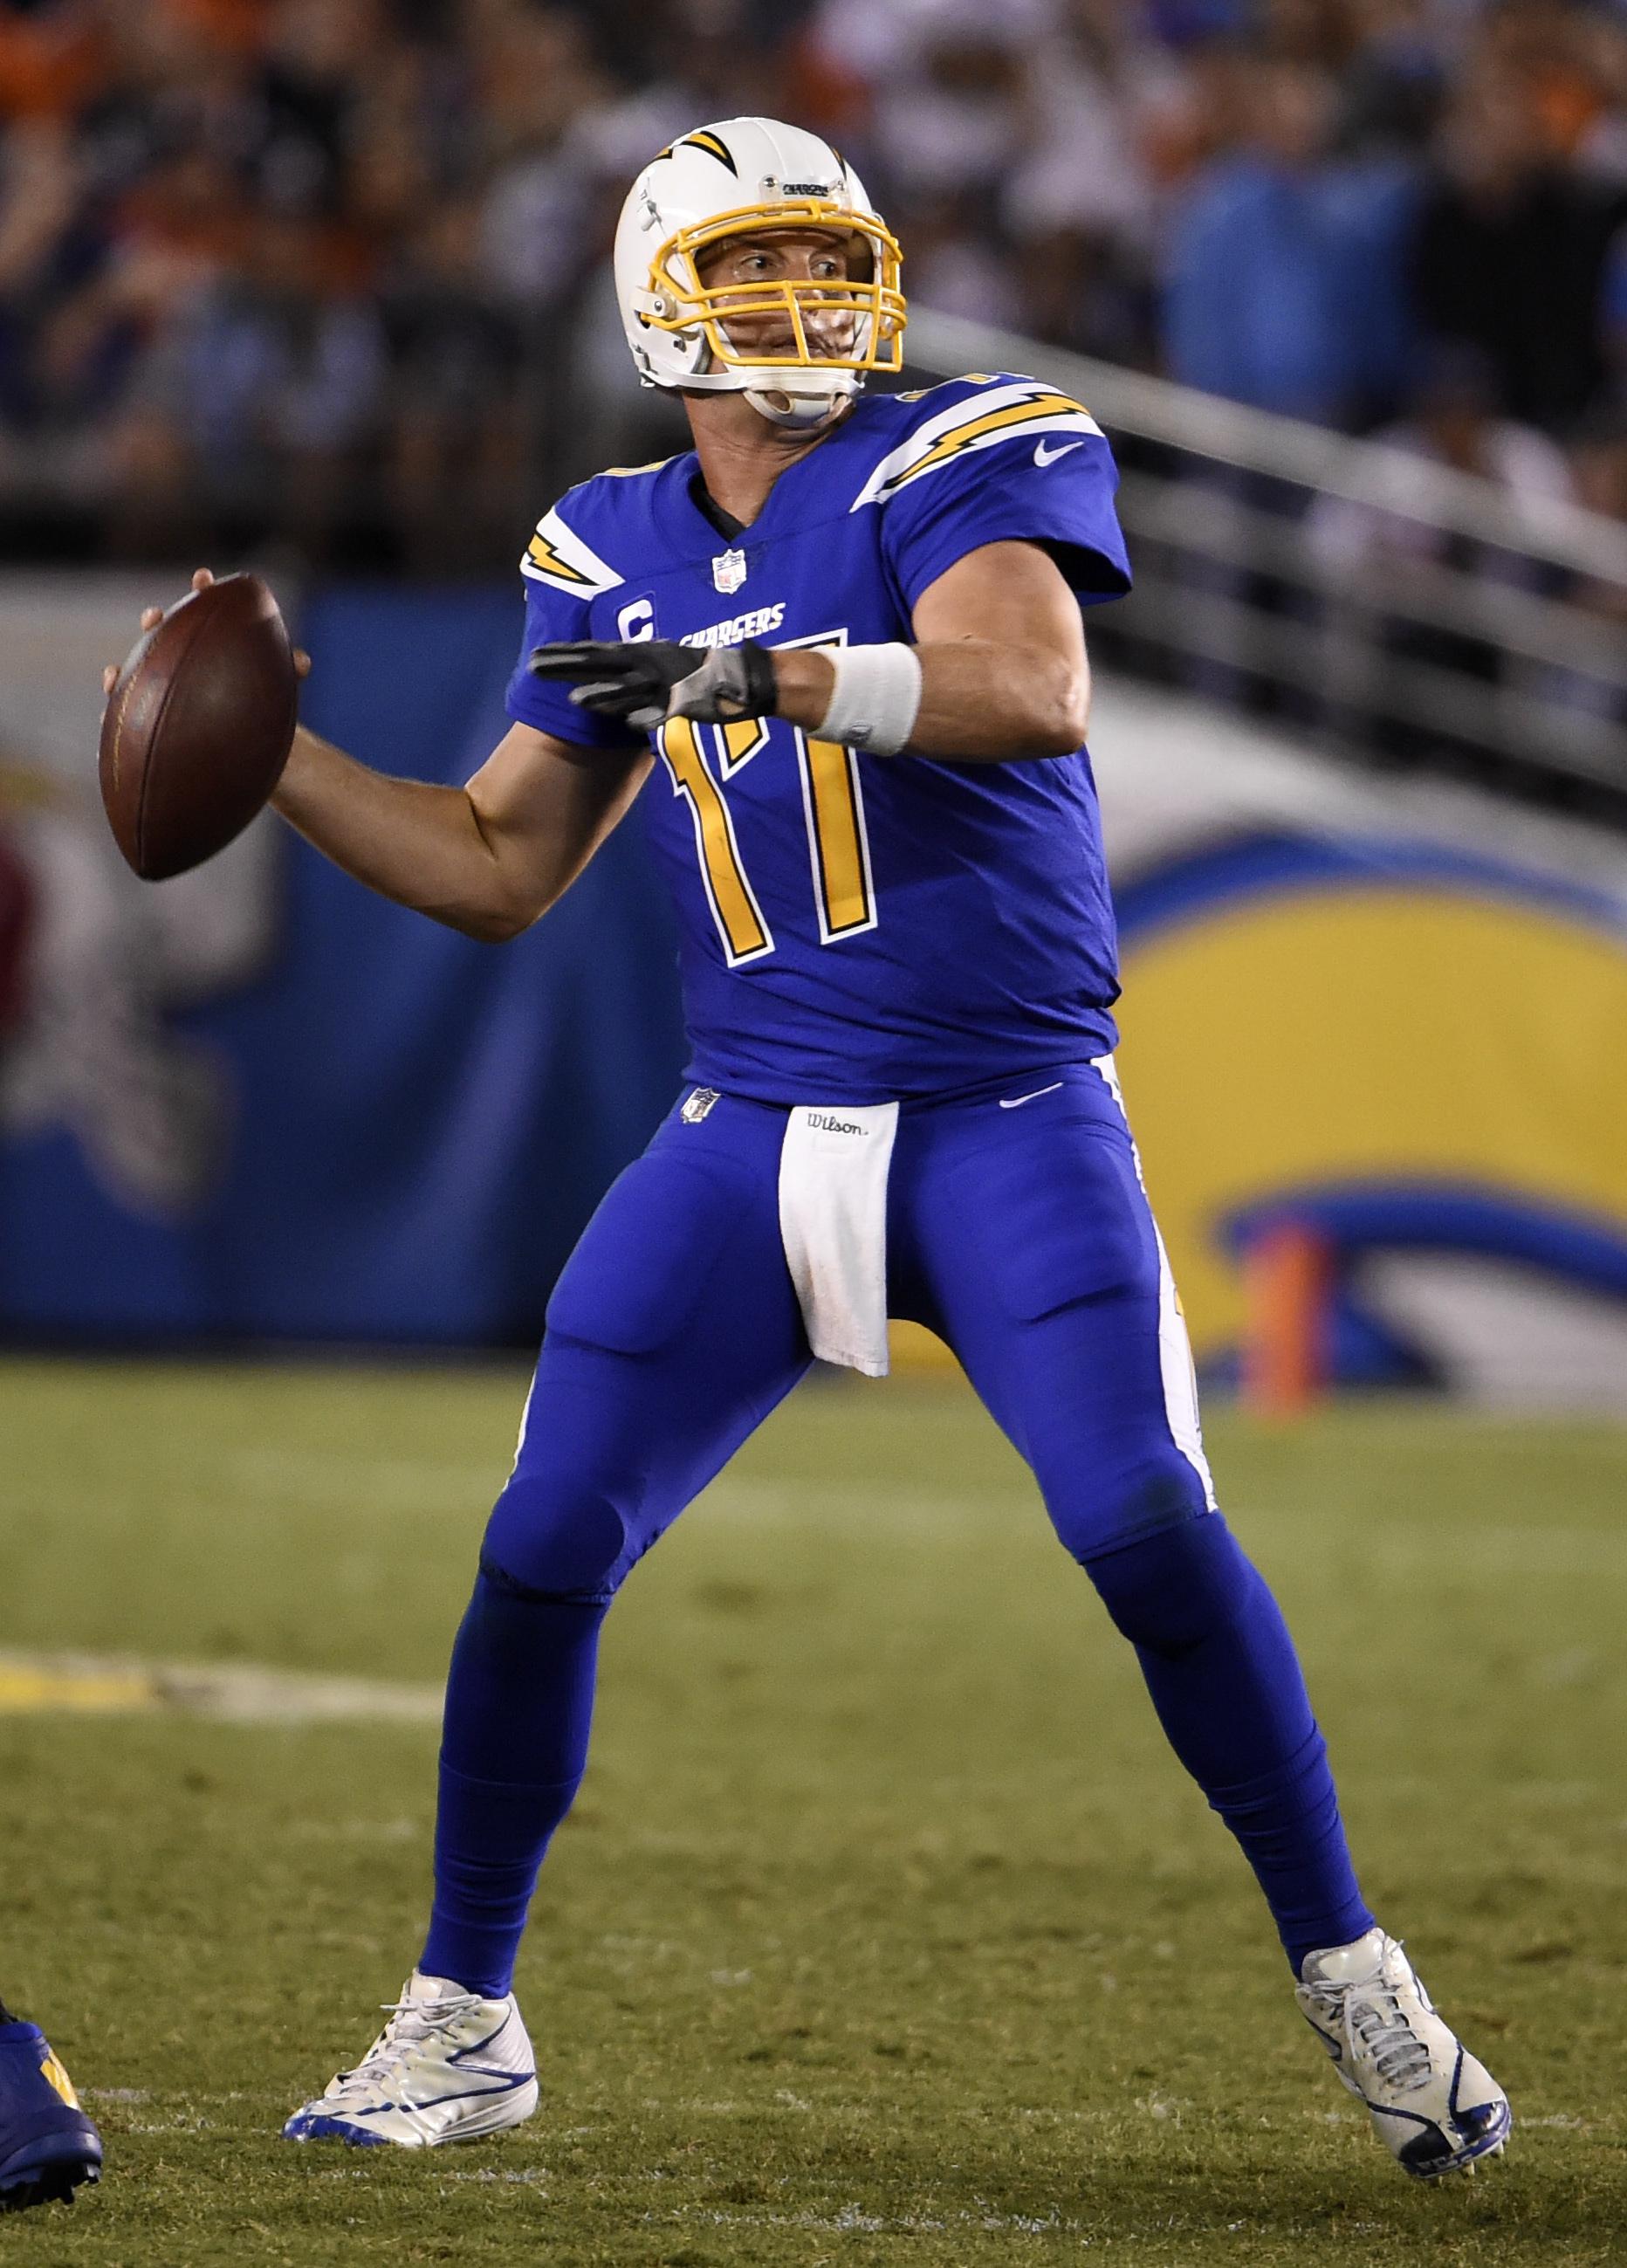 NFL Notes: Rivers leads Chargers to 21-13 victory against Broncos | The Spokesman-Review